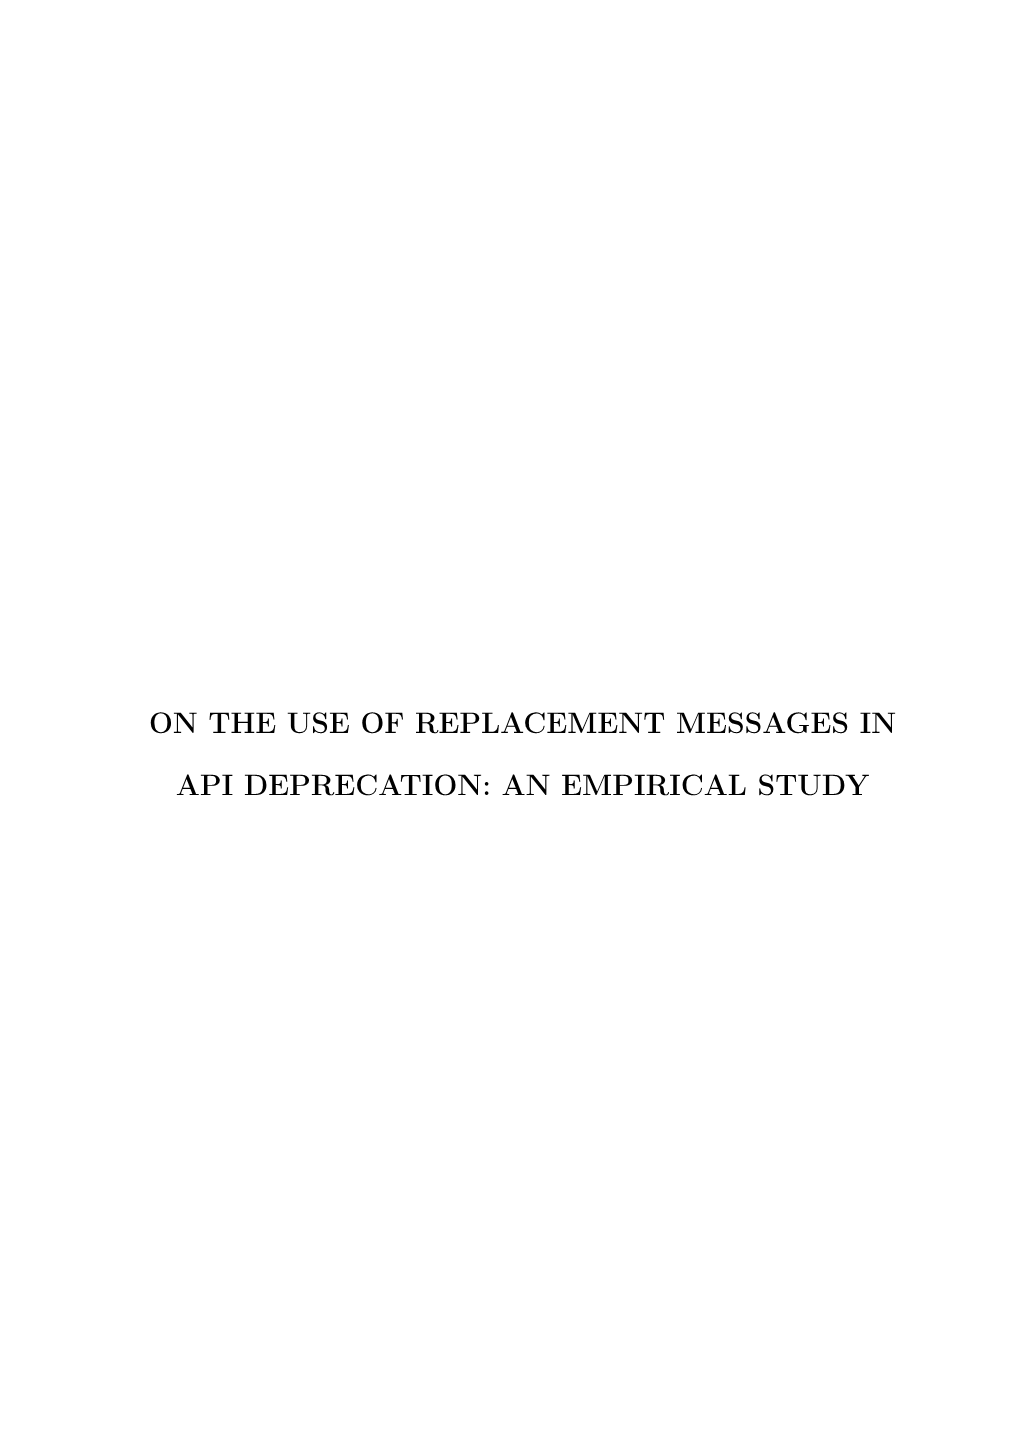 On the Use of Replacement Messages in API Deprecation: an Empirical Study